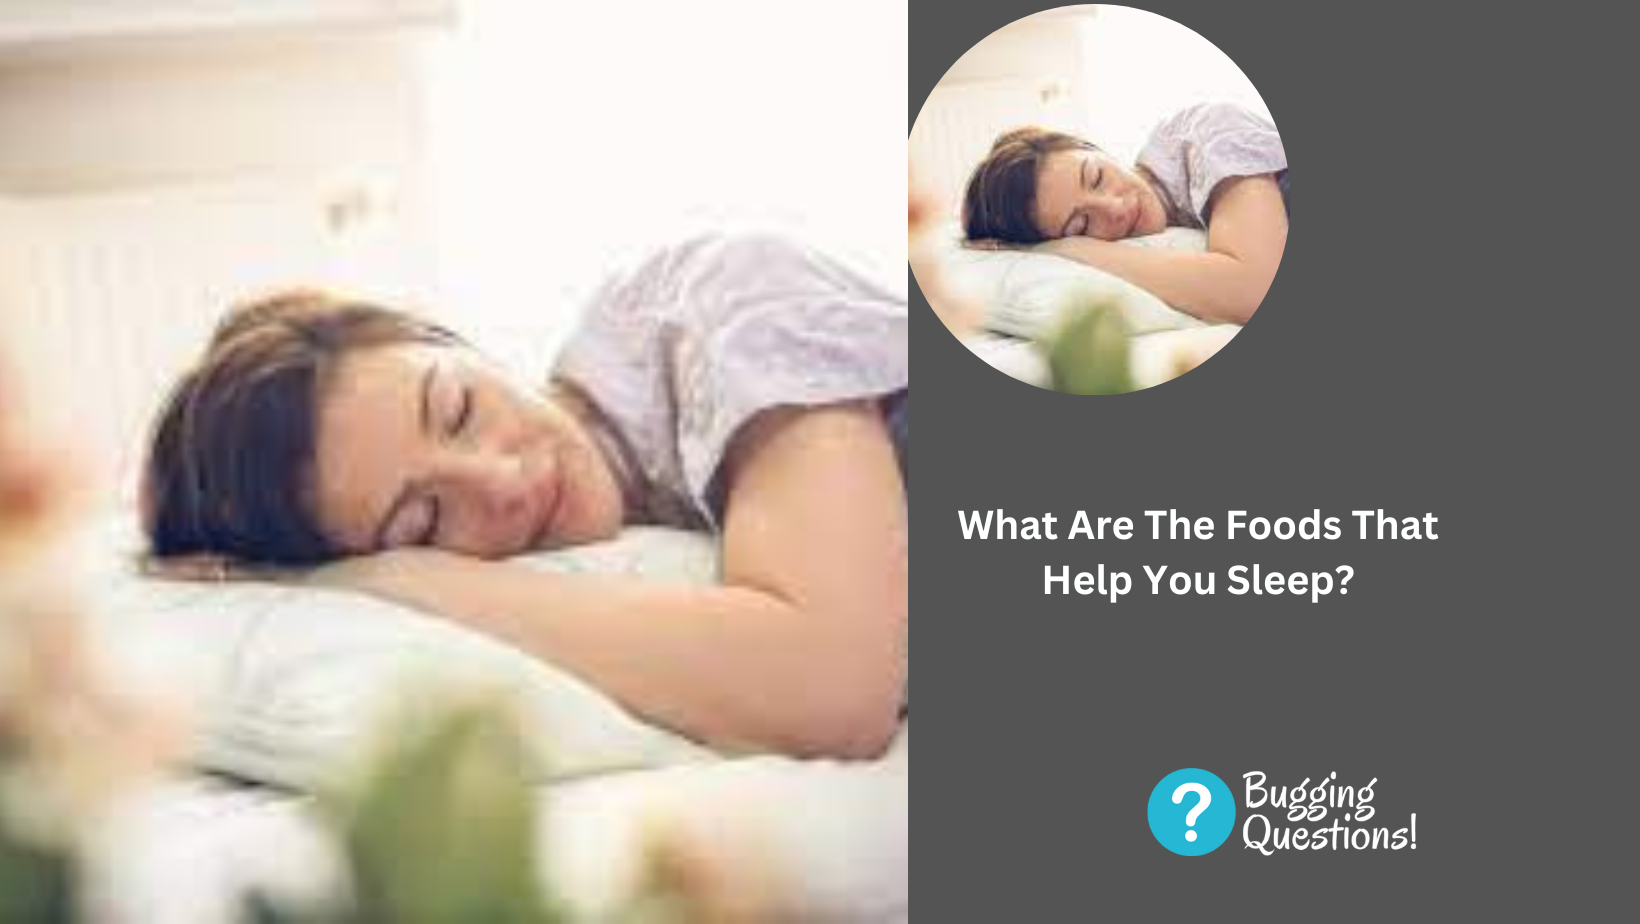 What Are The Foods That Help You Sleep?